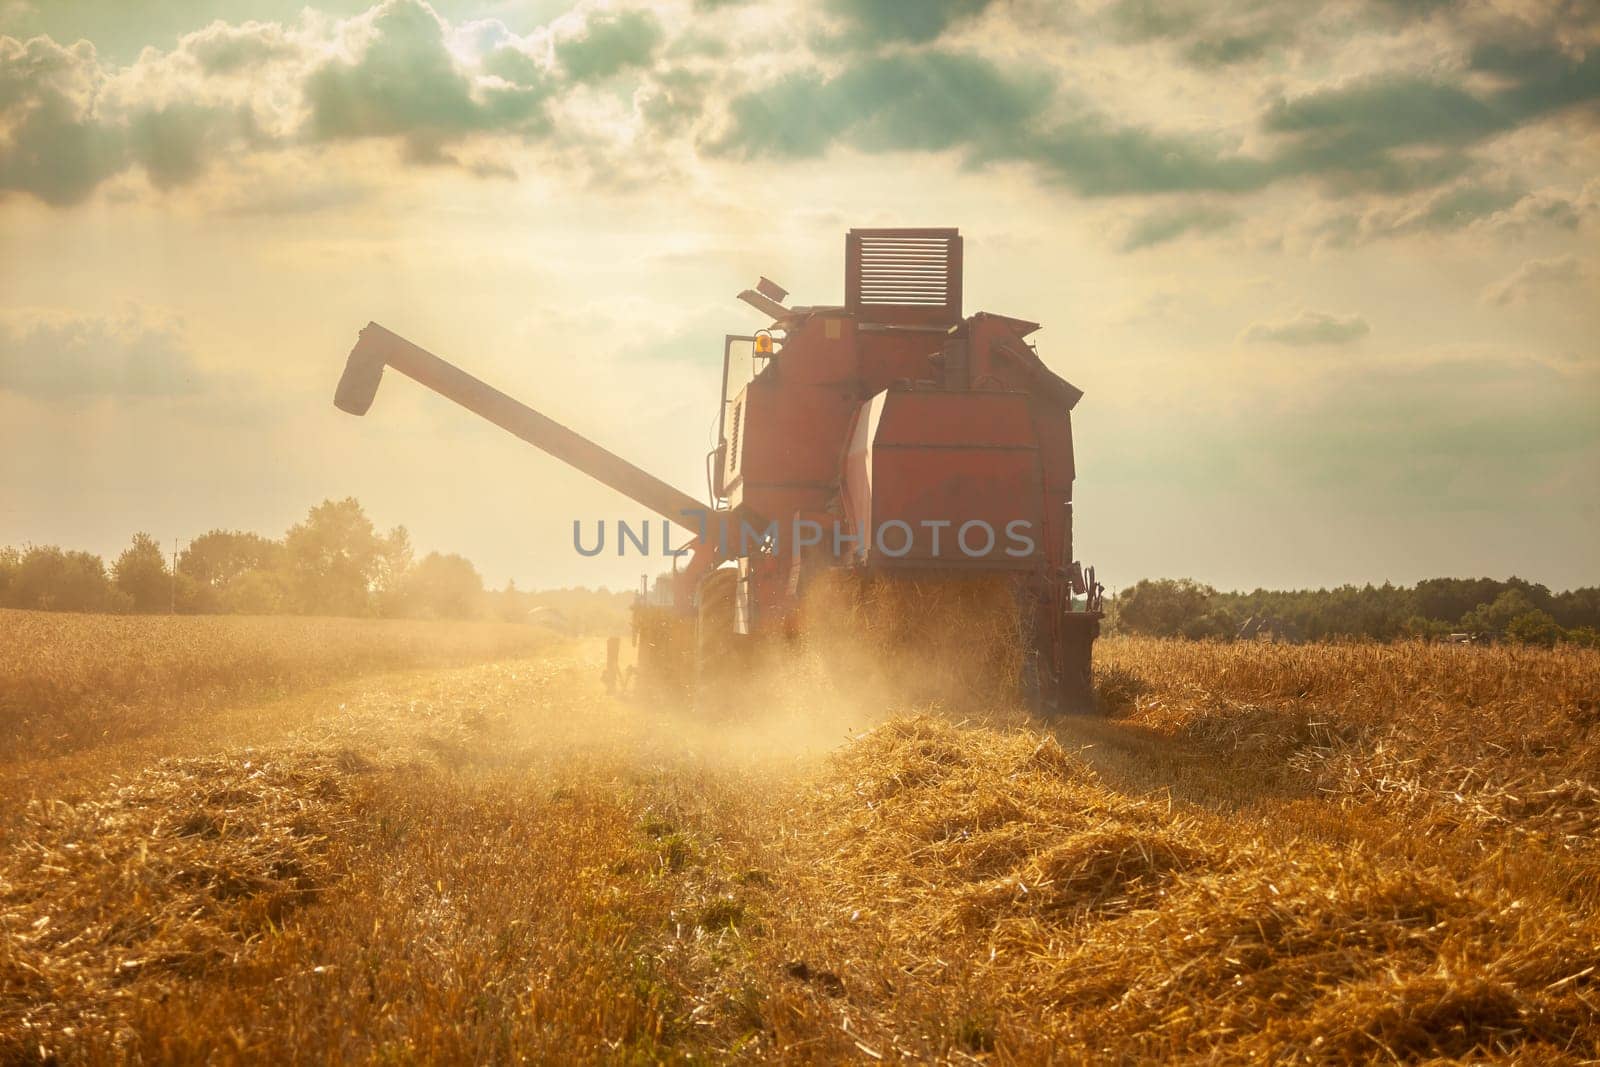 A large agricultural harvester mowing in a field with grain, summer day